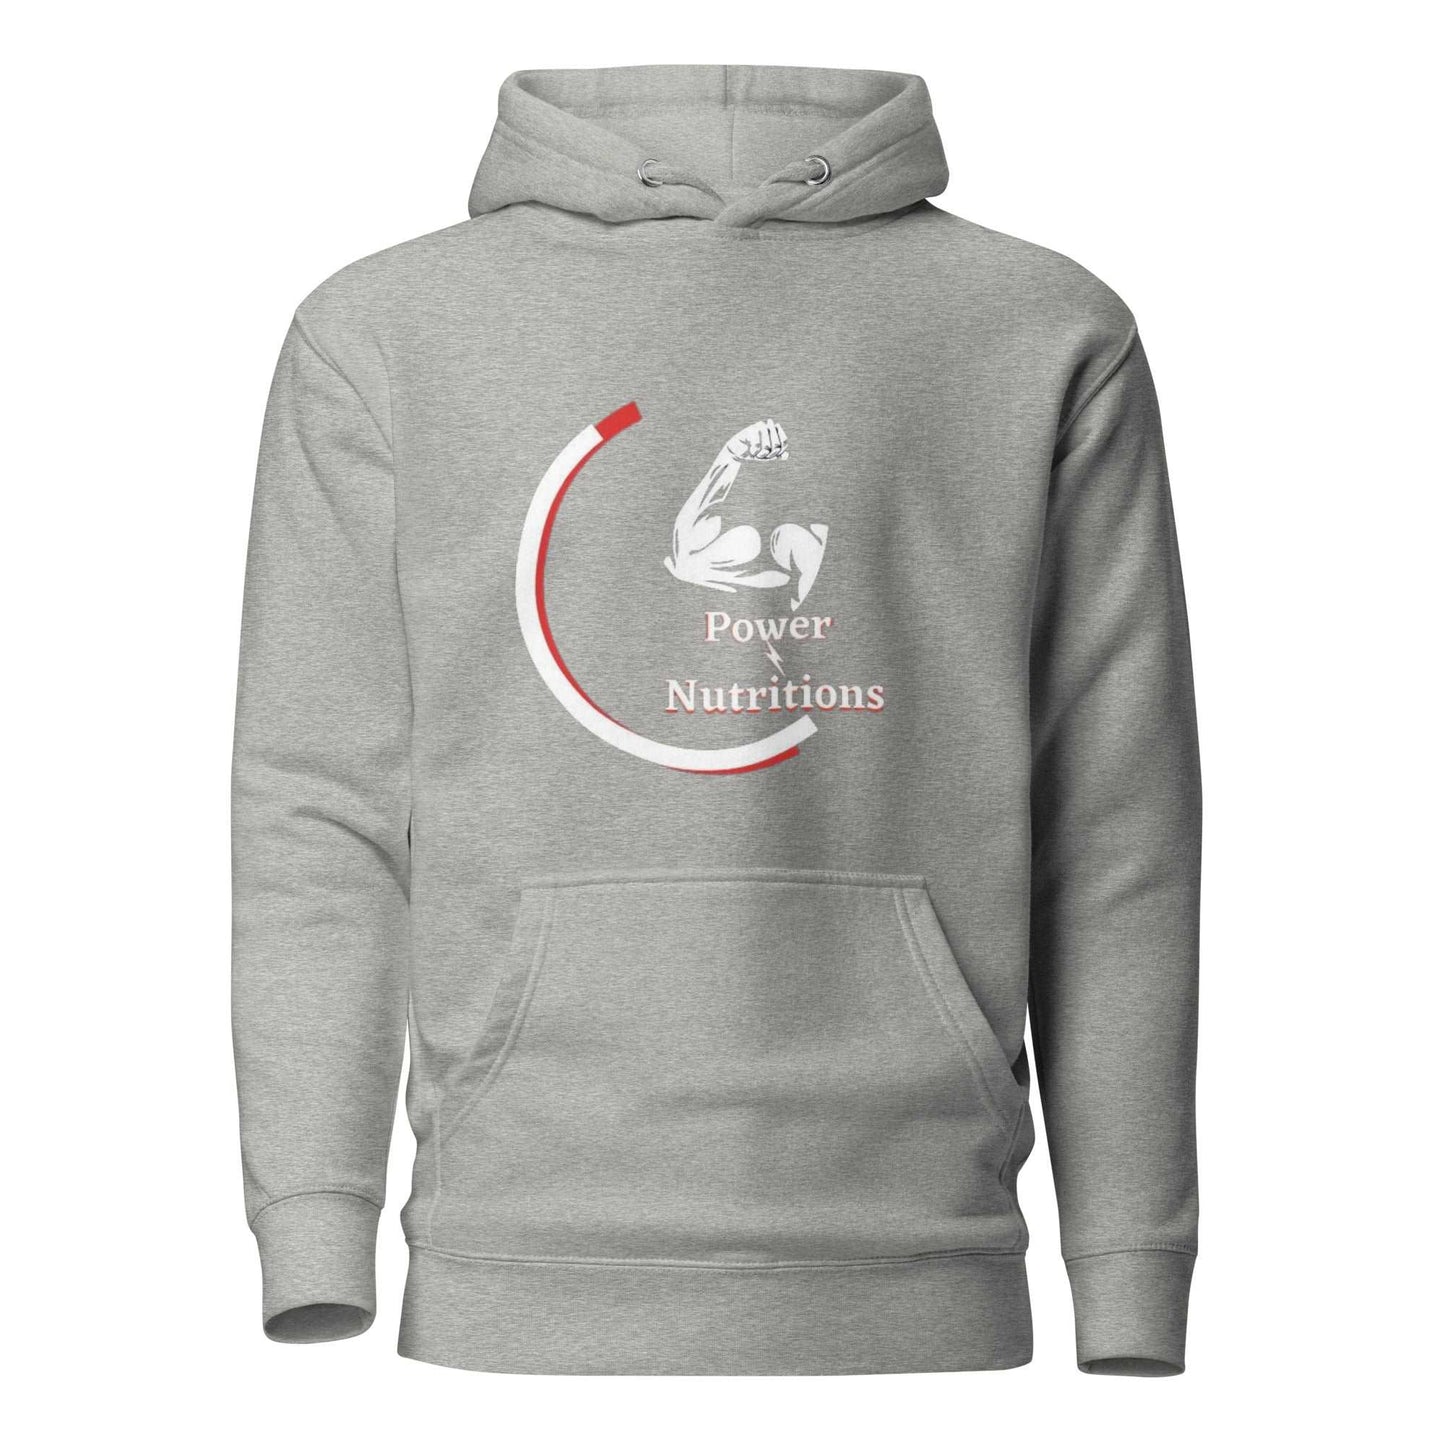 Professional title: "Unisex Hoodie by Power Nutritions"